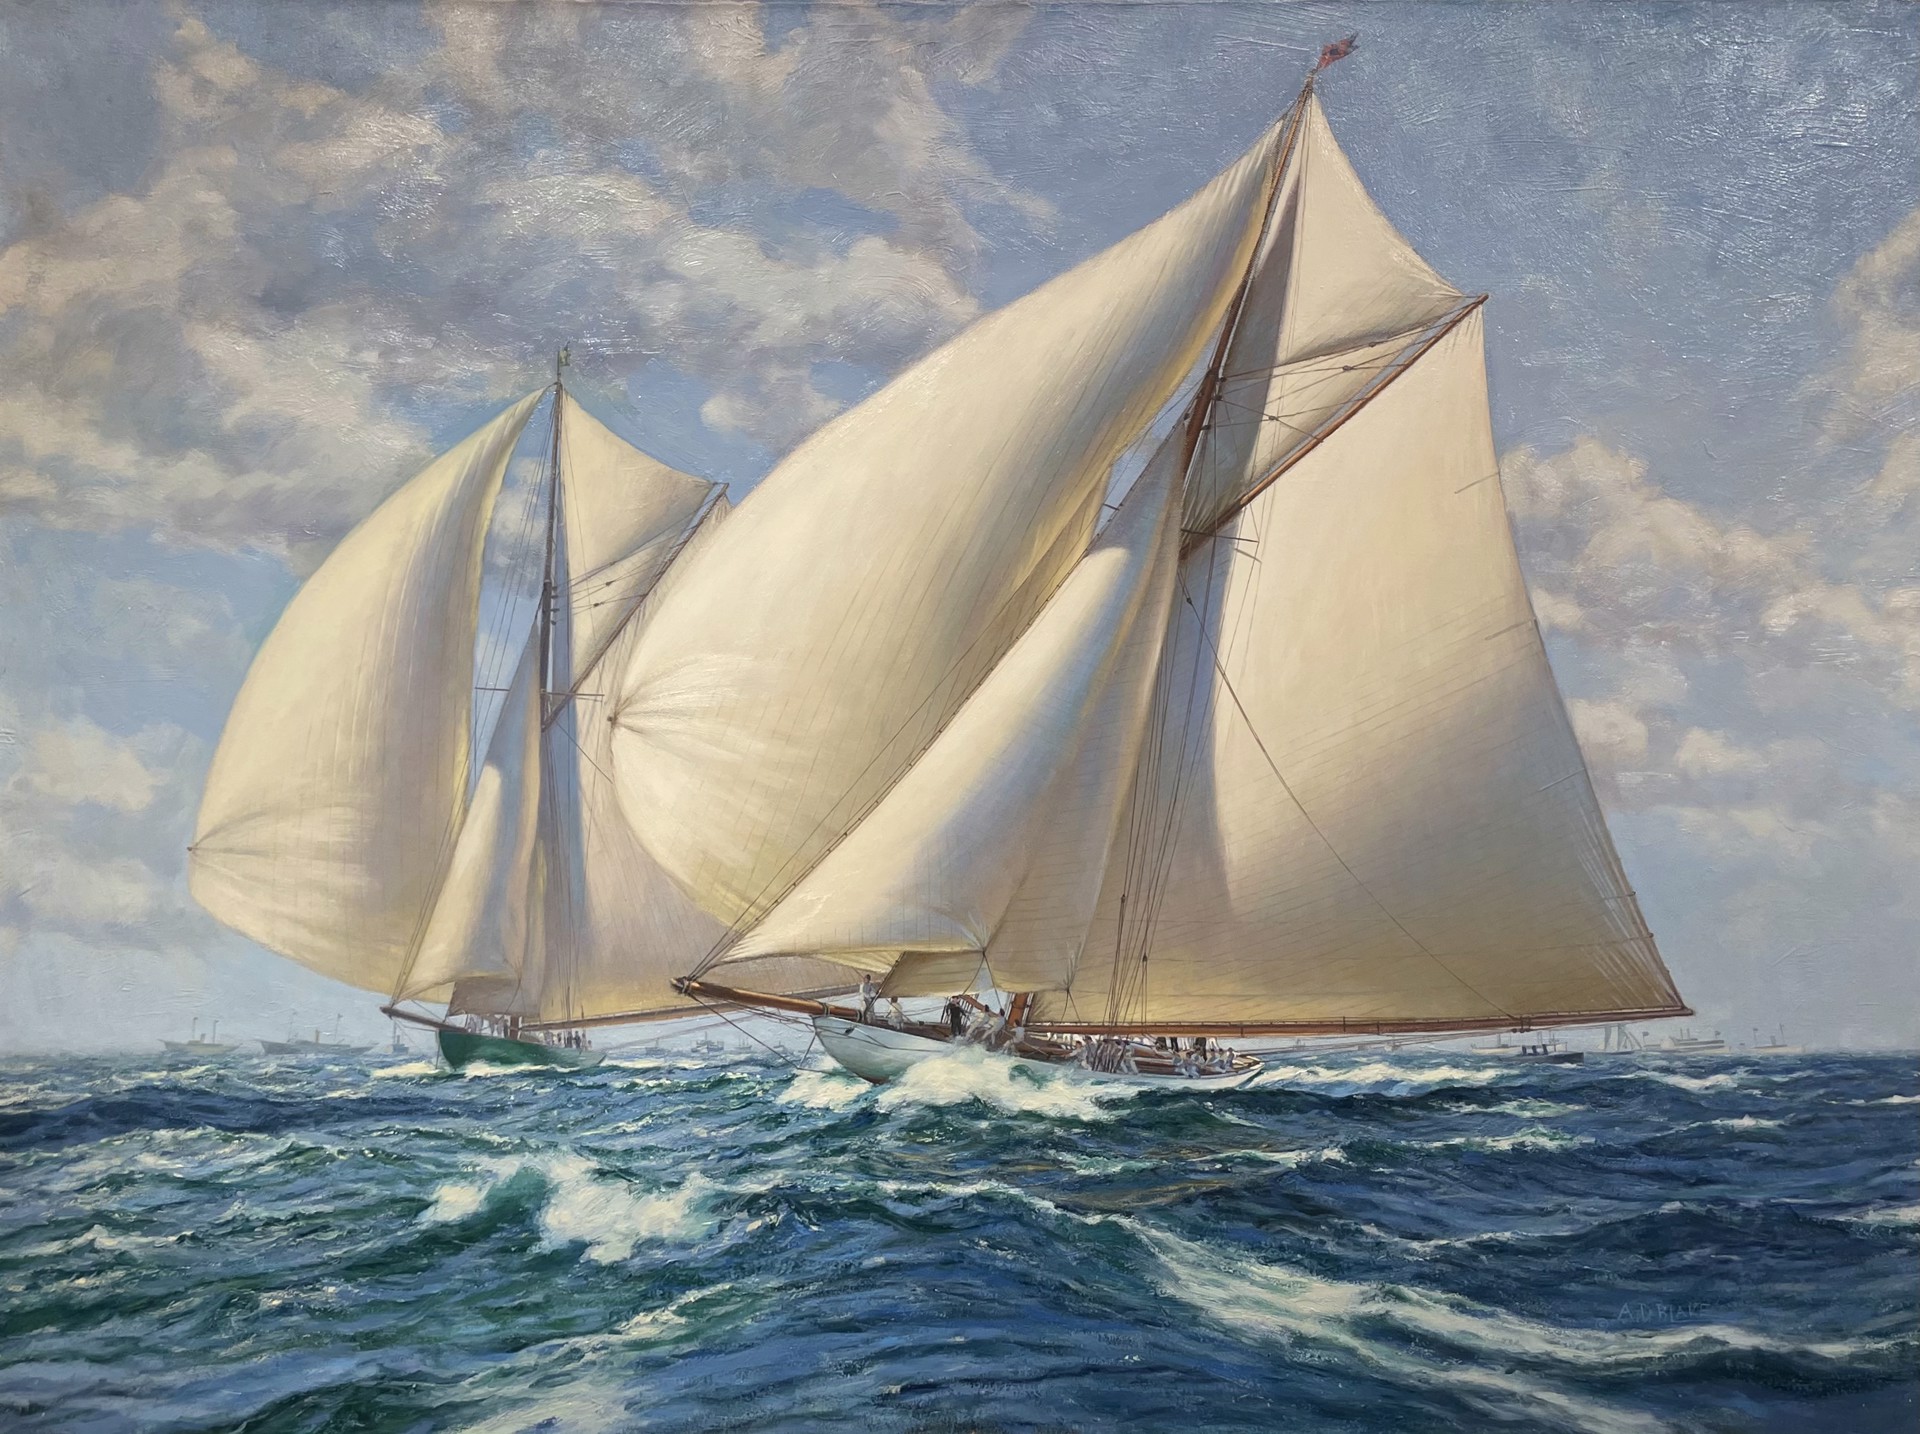 1899 America's Cup by Anthony D. Blake